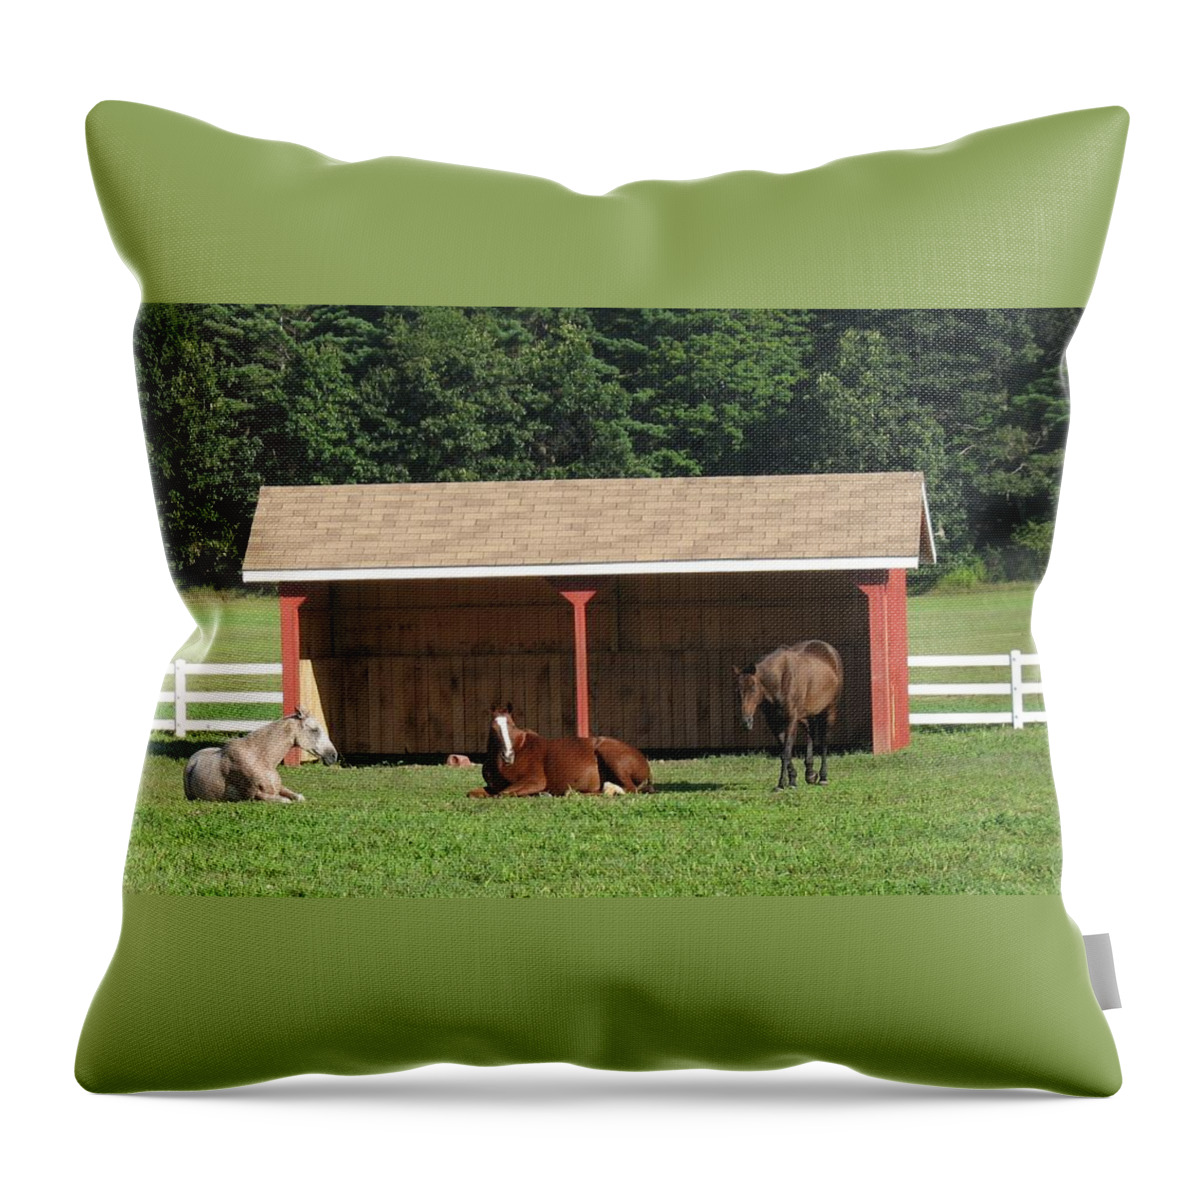 Horses Throw Pillow featuring the photograph Lazy Horses by Ed Smith